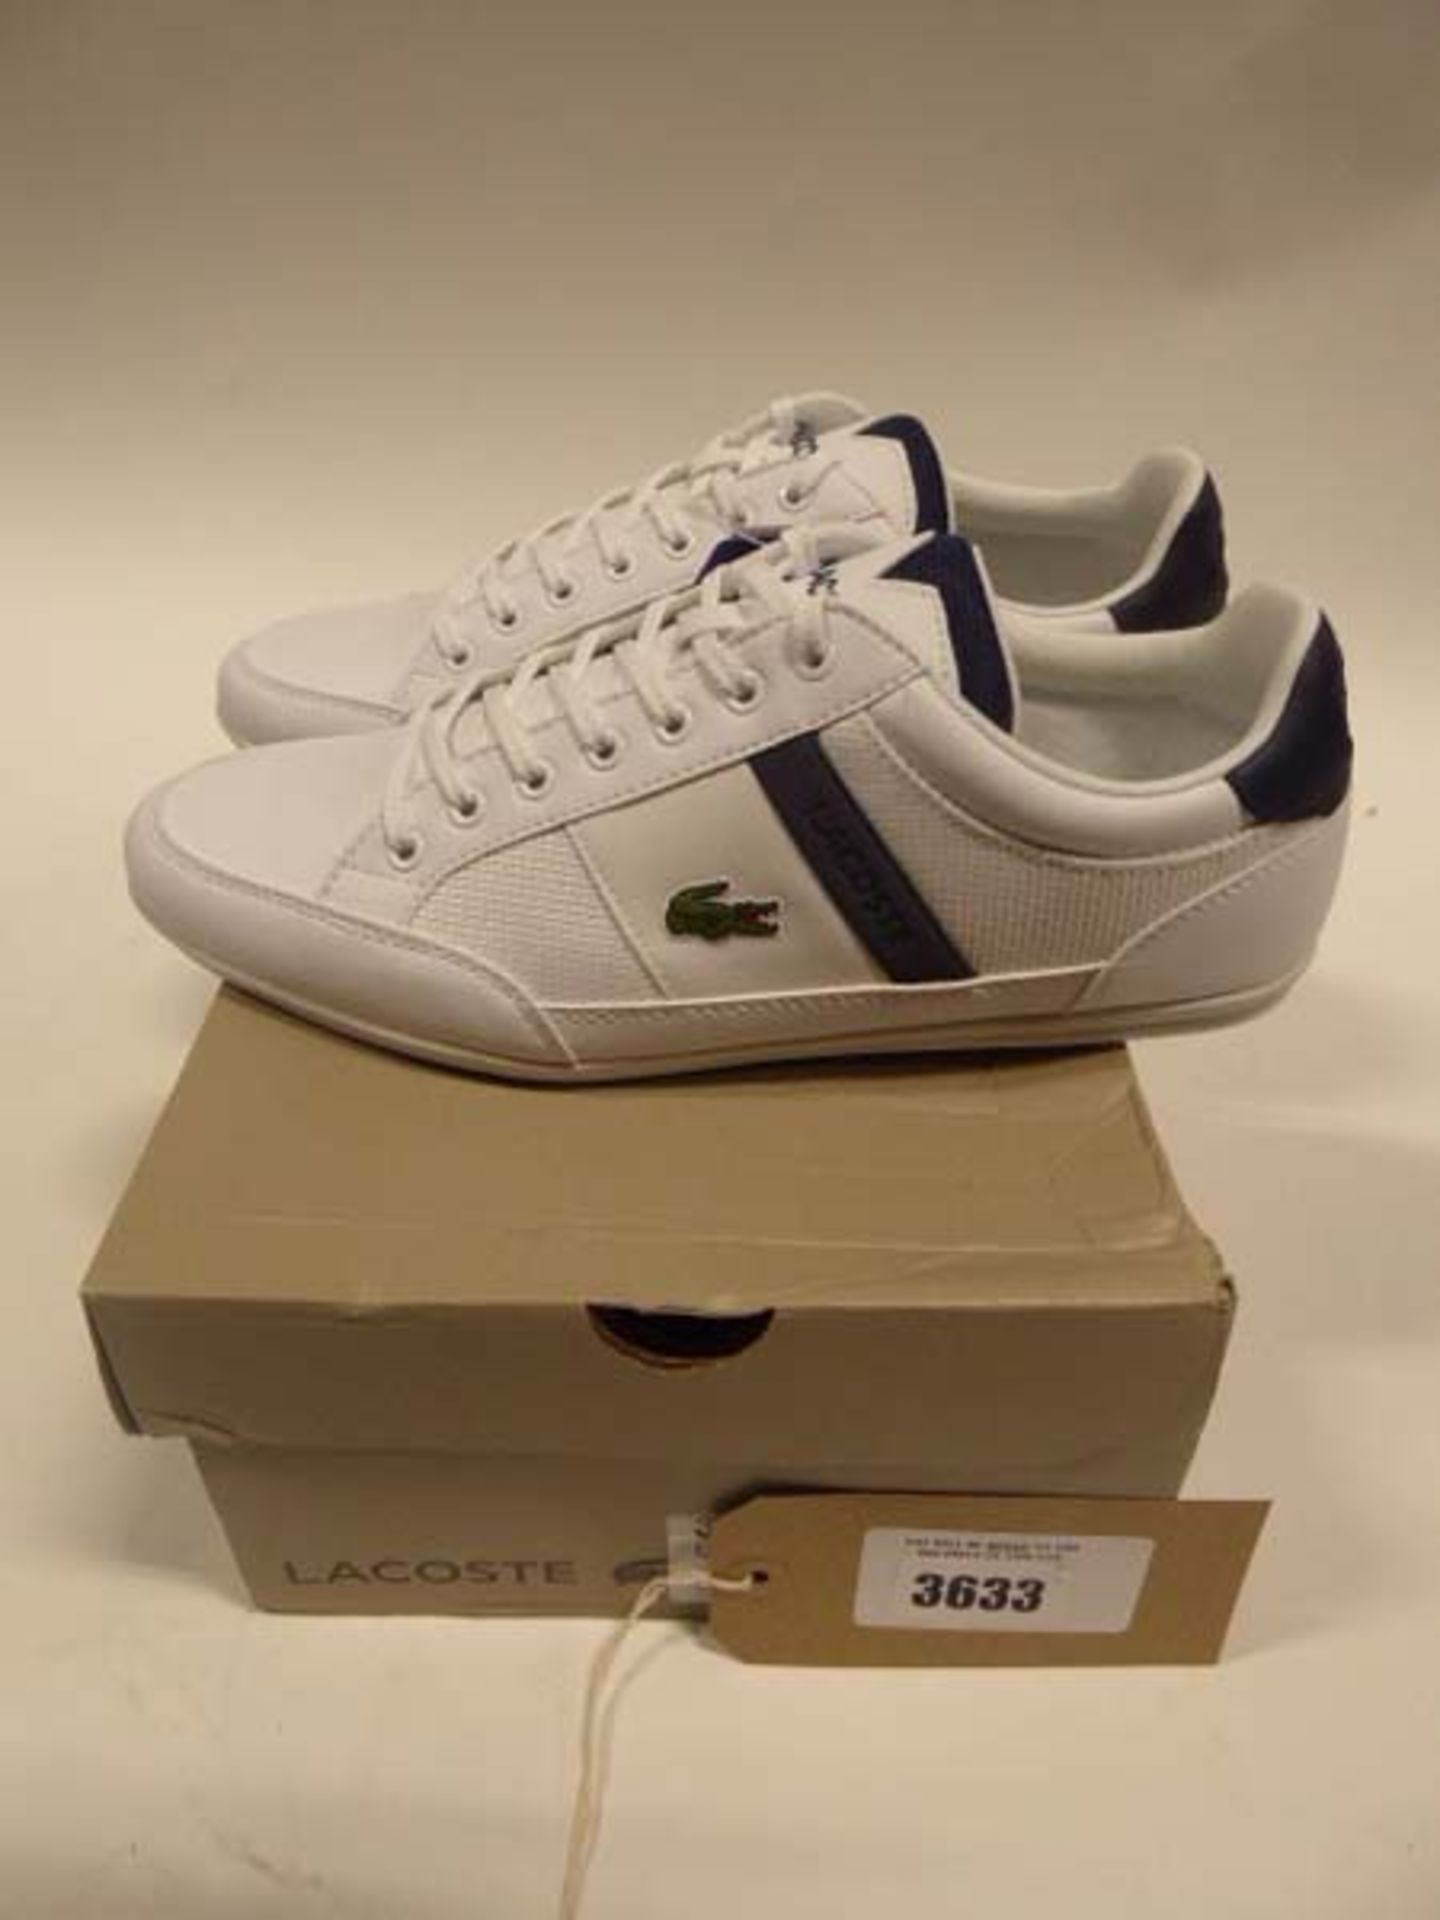 Lacoste trainers size 8